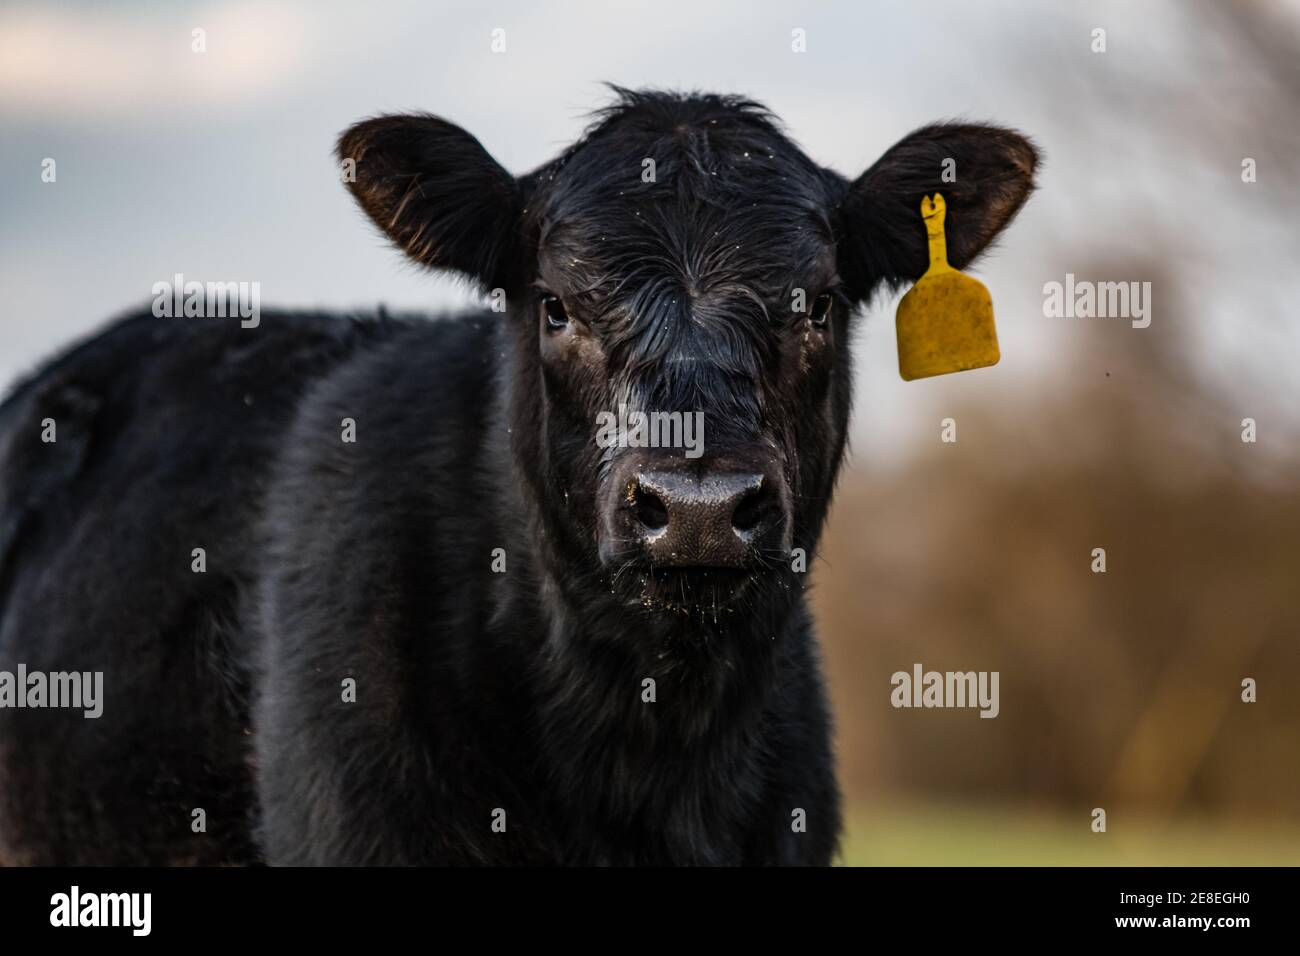 Close up of black Angus calf with yellow ear tag and out-of-focus background Stock Photo